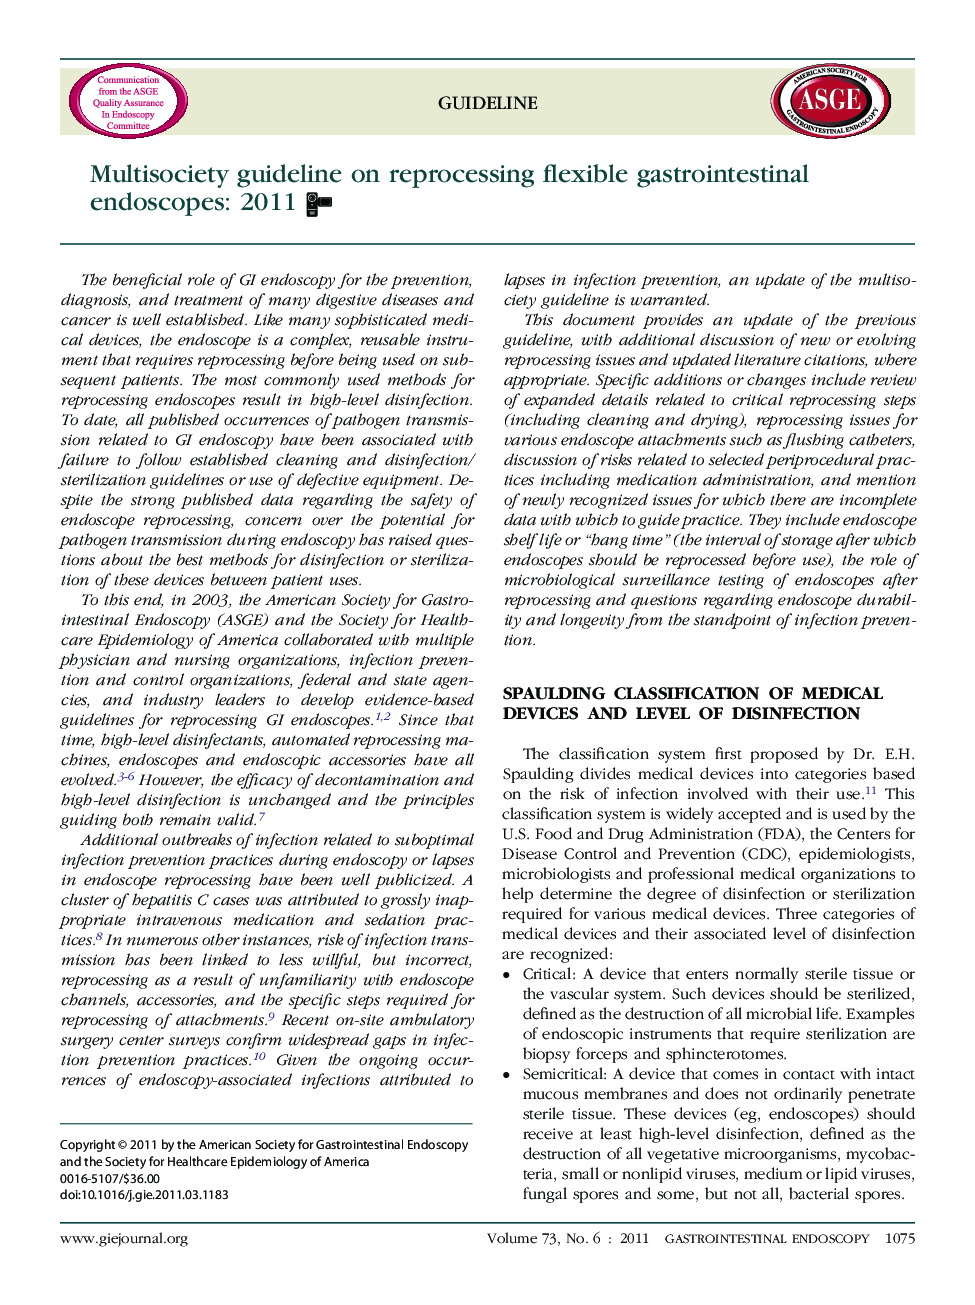 Multisociety guideline on reprocessing flexible gastrointestinal endoscopes: 2011